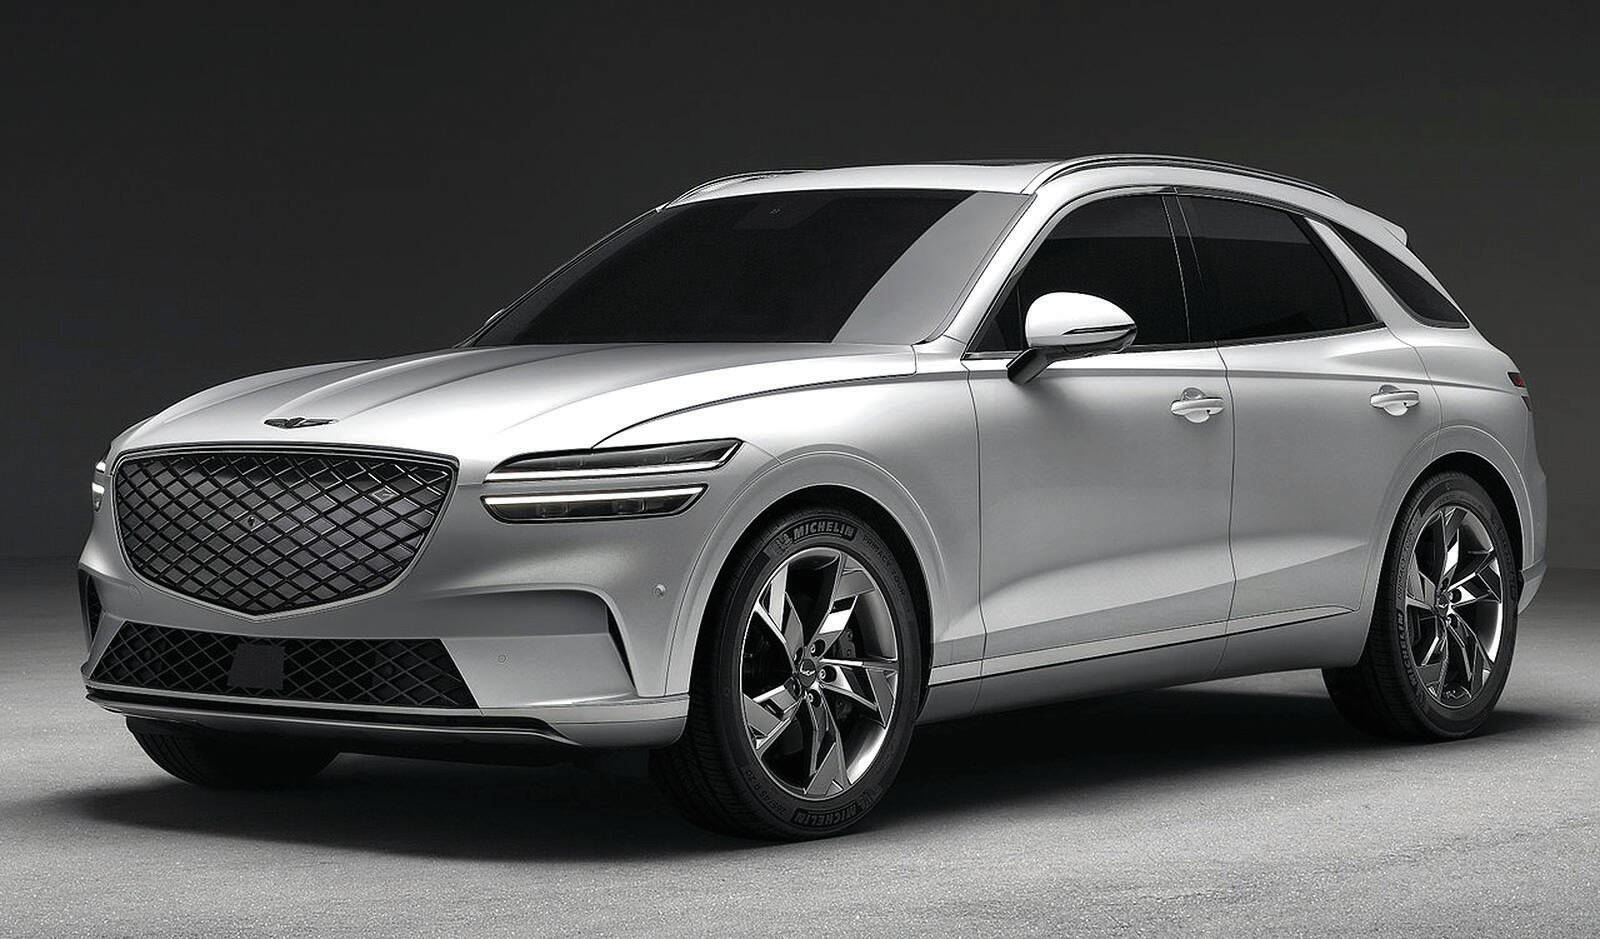 The electric GV70, expected to arrive by mid-2022, will be available with up to 483 horsepower. PHOTO: GENESIS